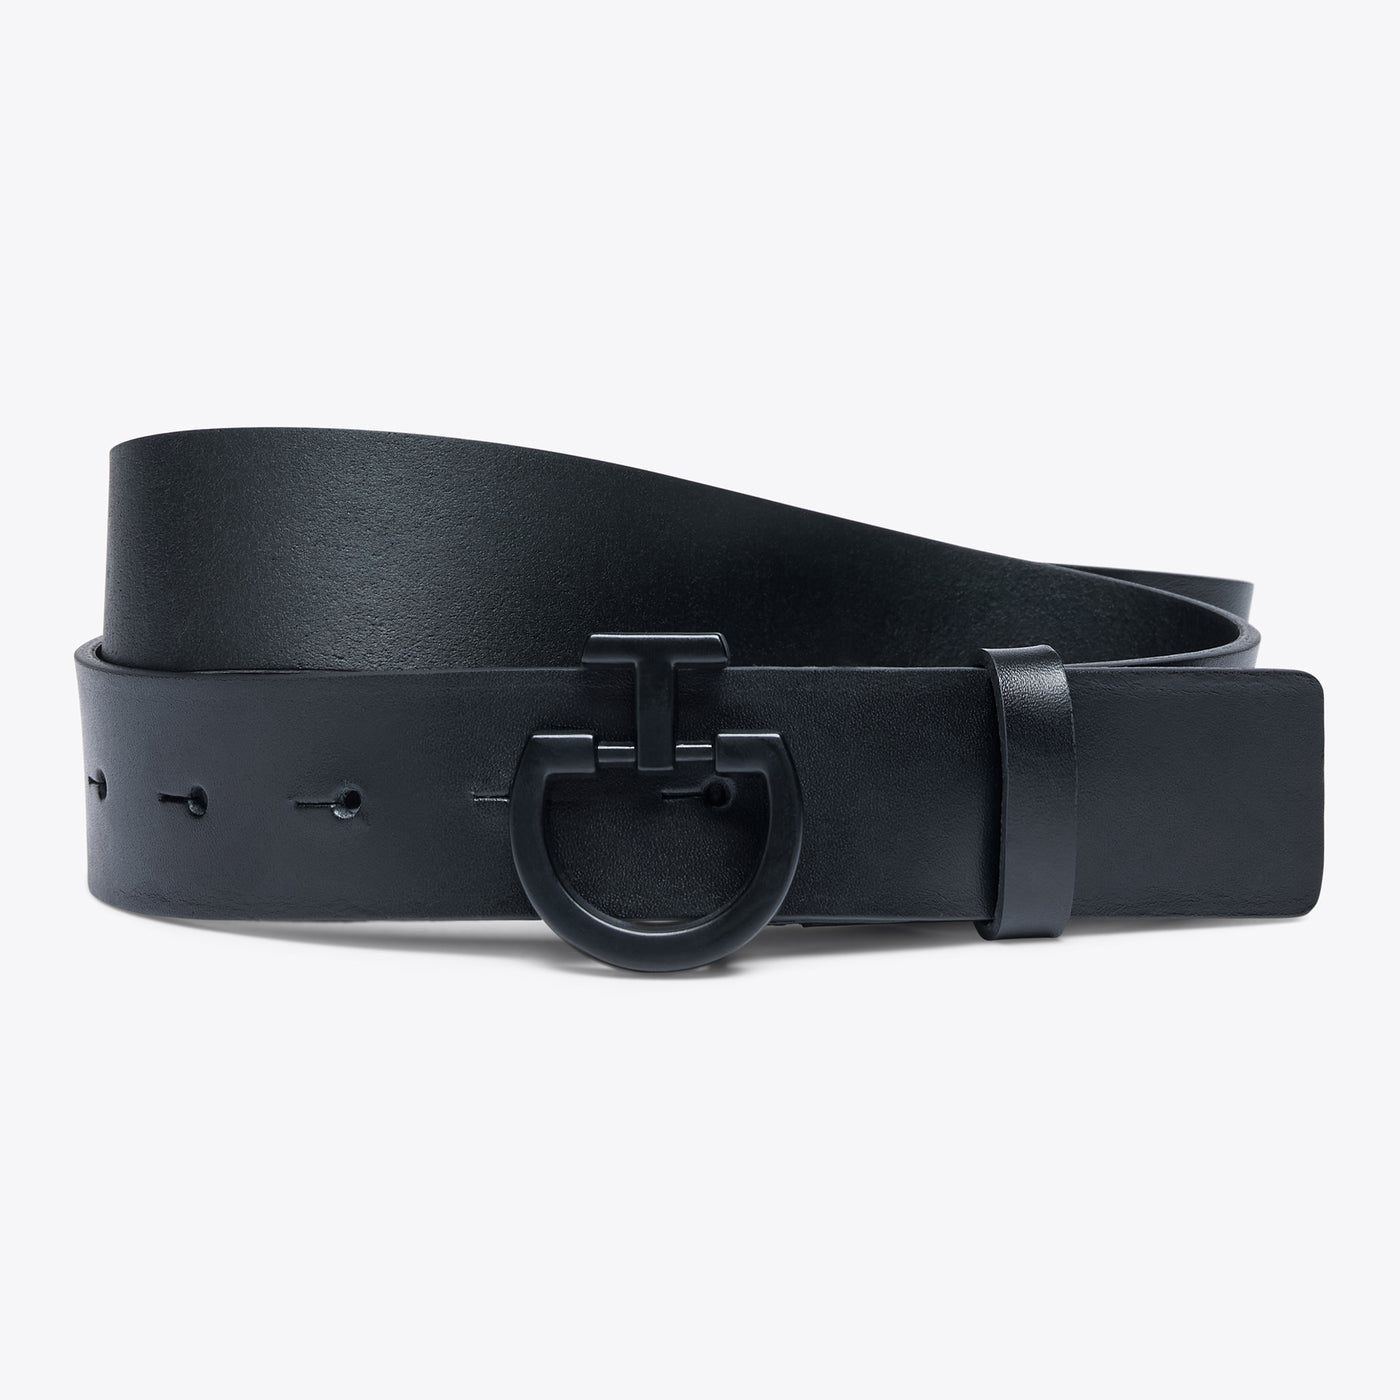 CT women's leather belt with black CT buckle